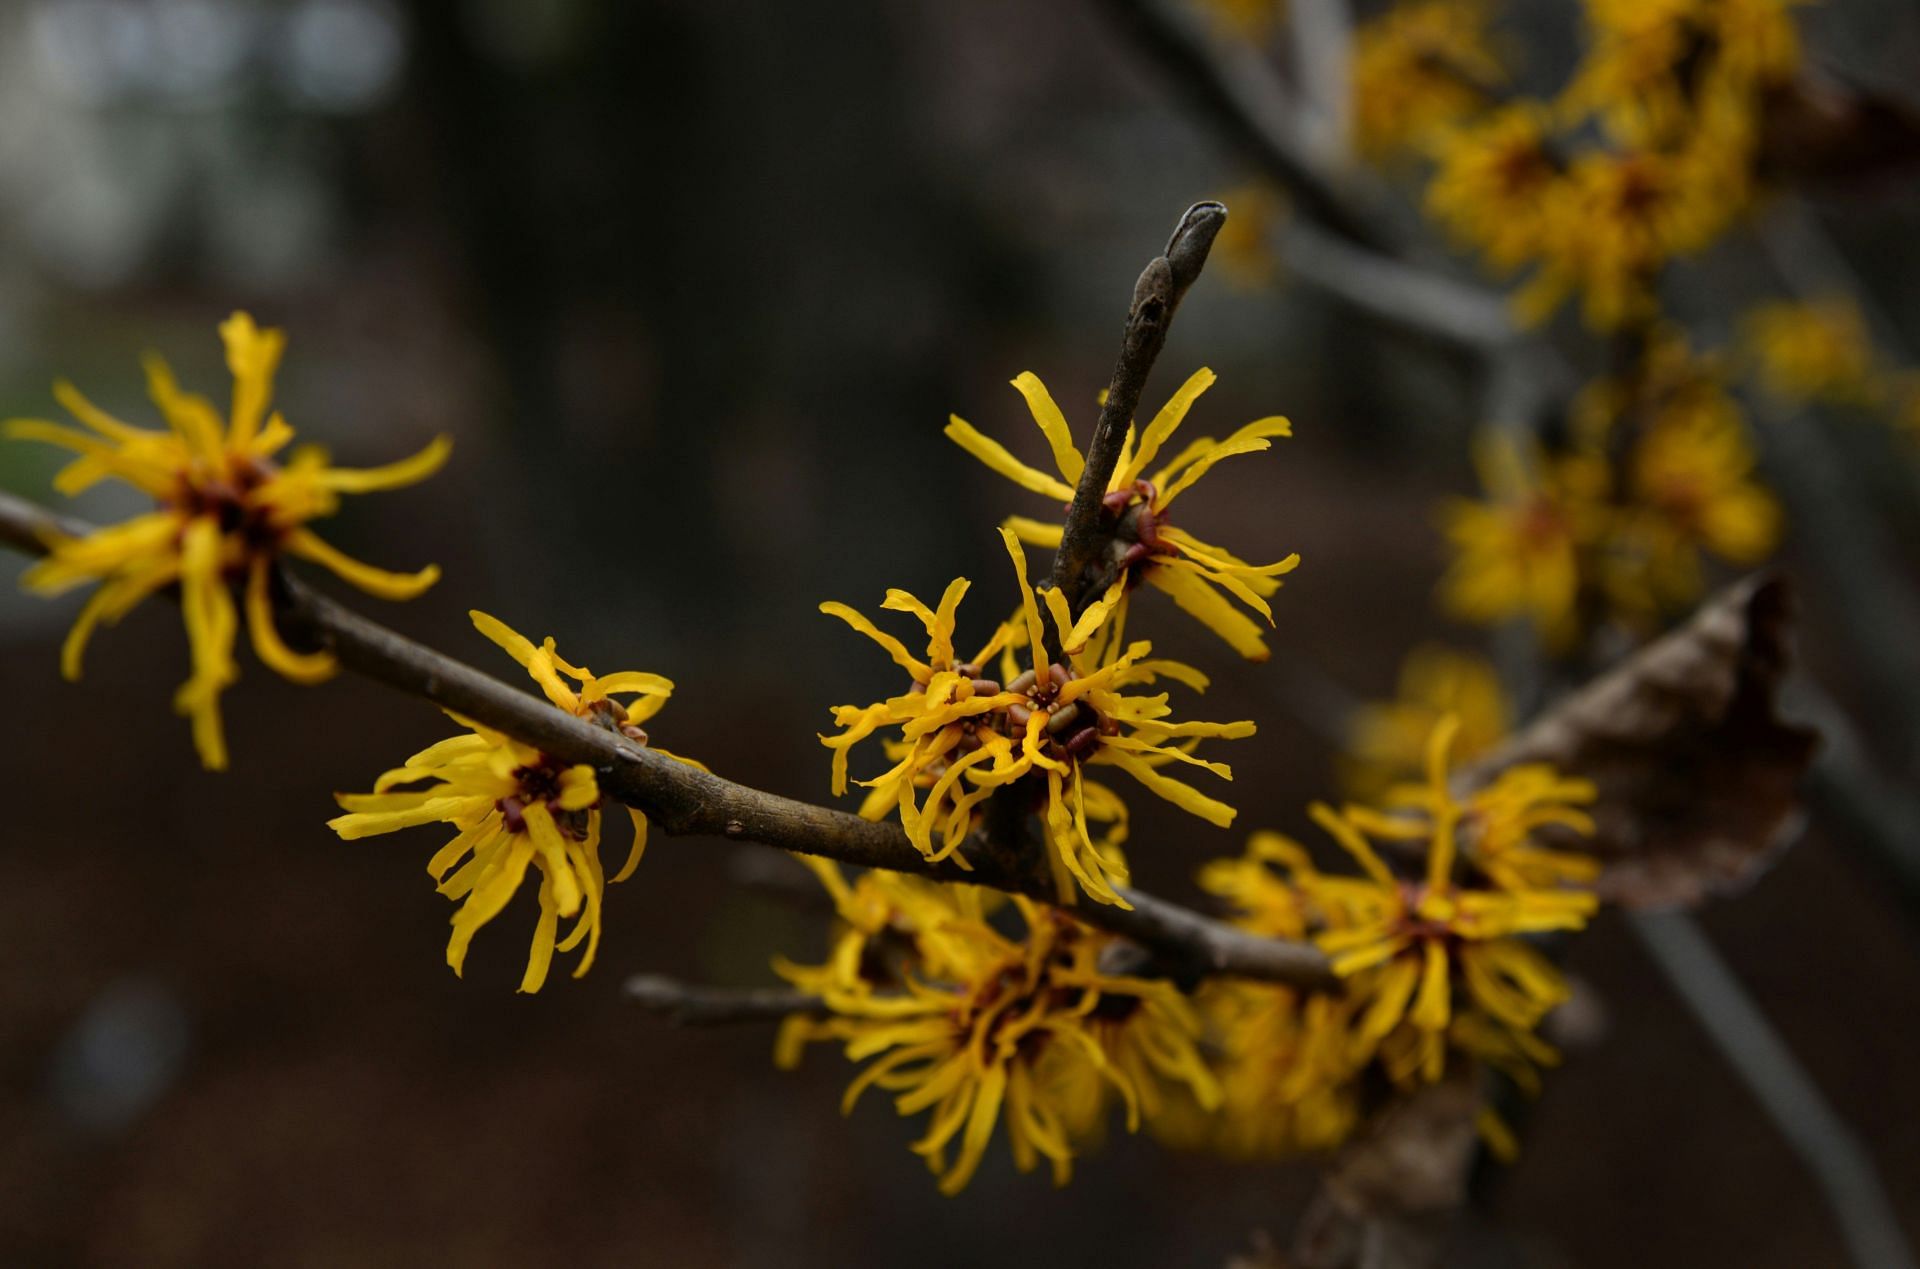 The magical witch hazel plant (Image by Laura Ockel/Unsplash)